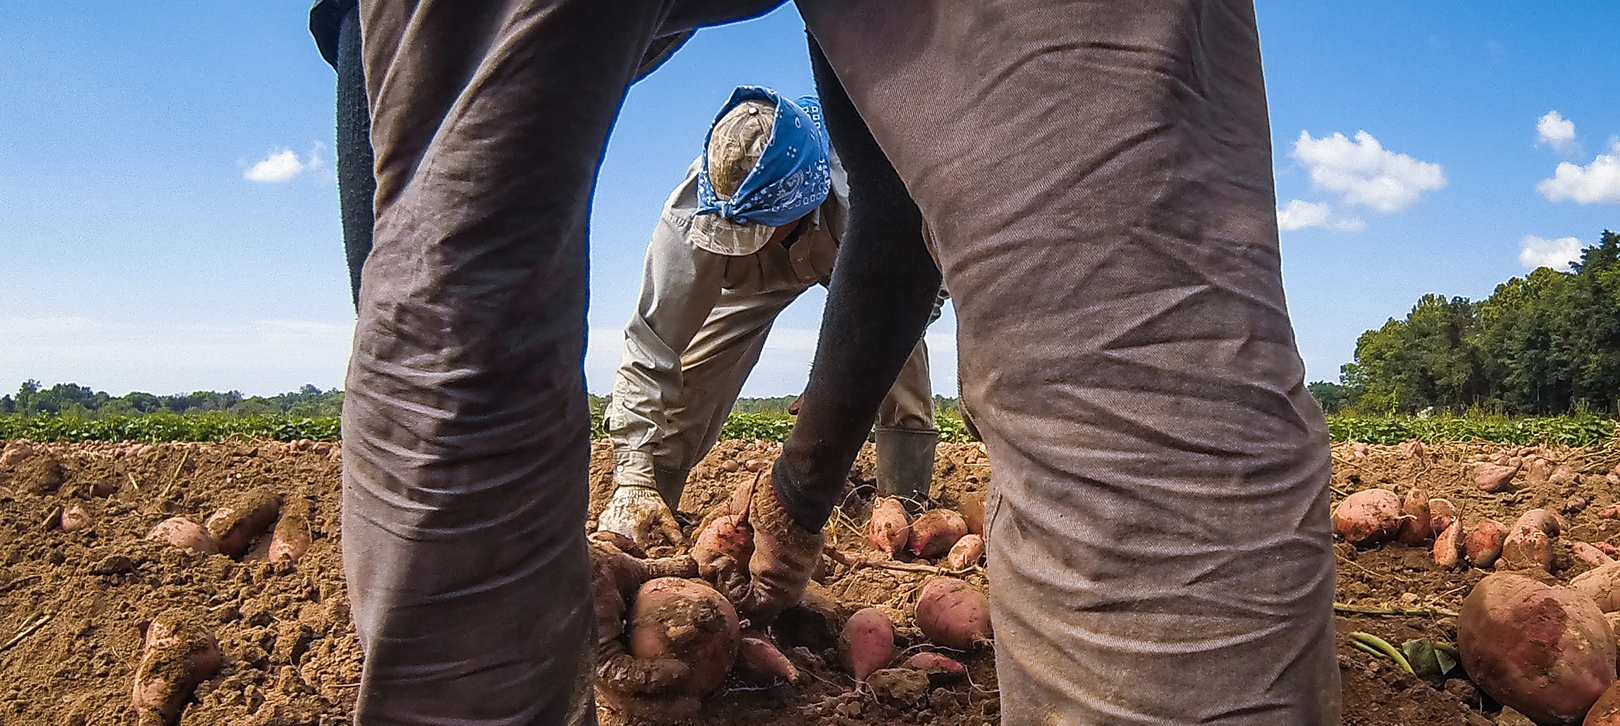 Picking Sweet Potatoes: Two farm workers harvesting sweet potatoes from the ground